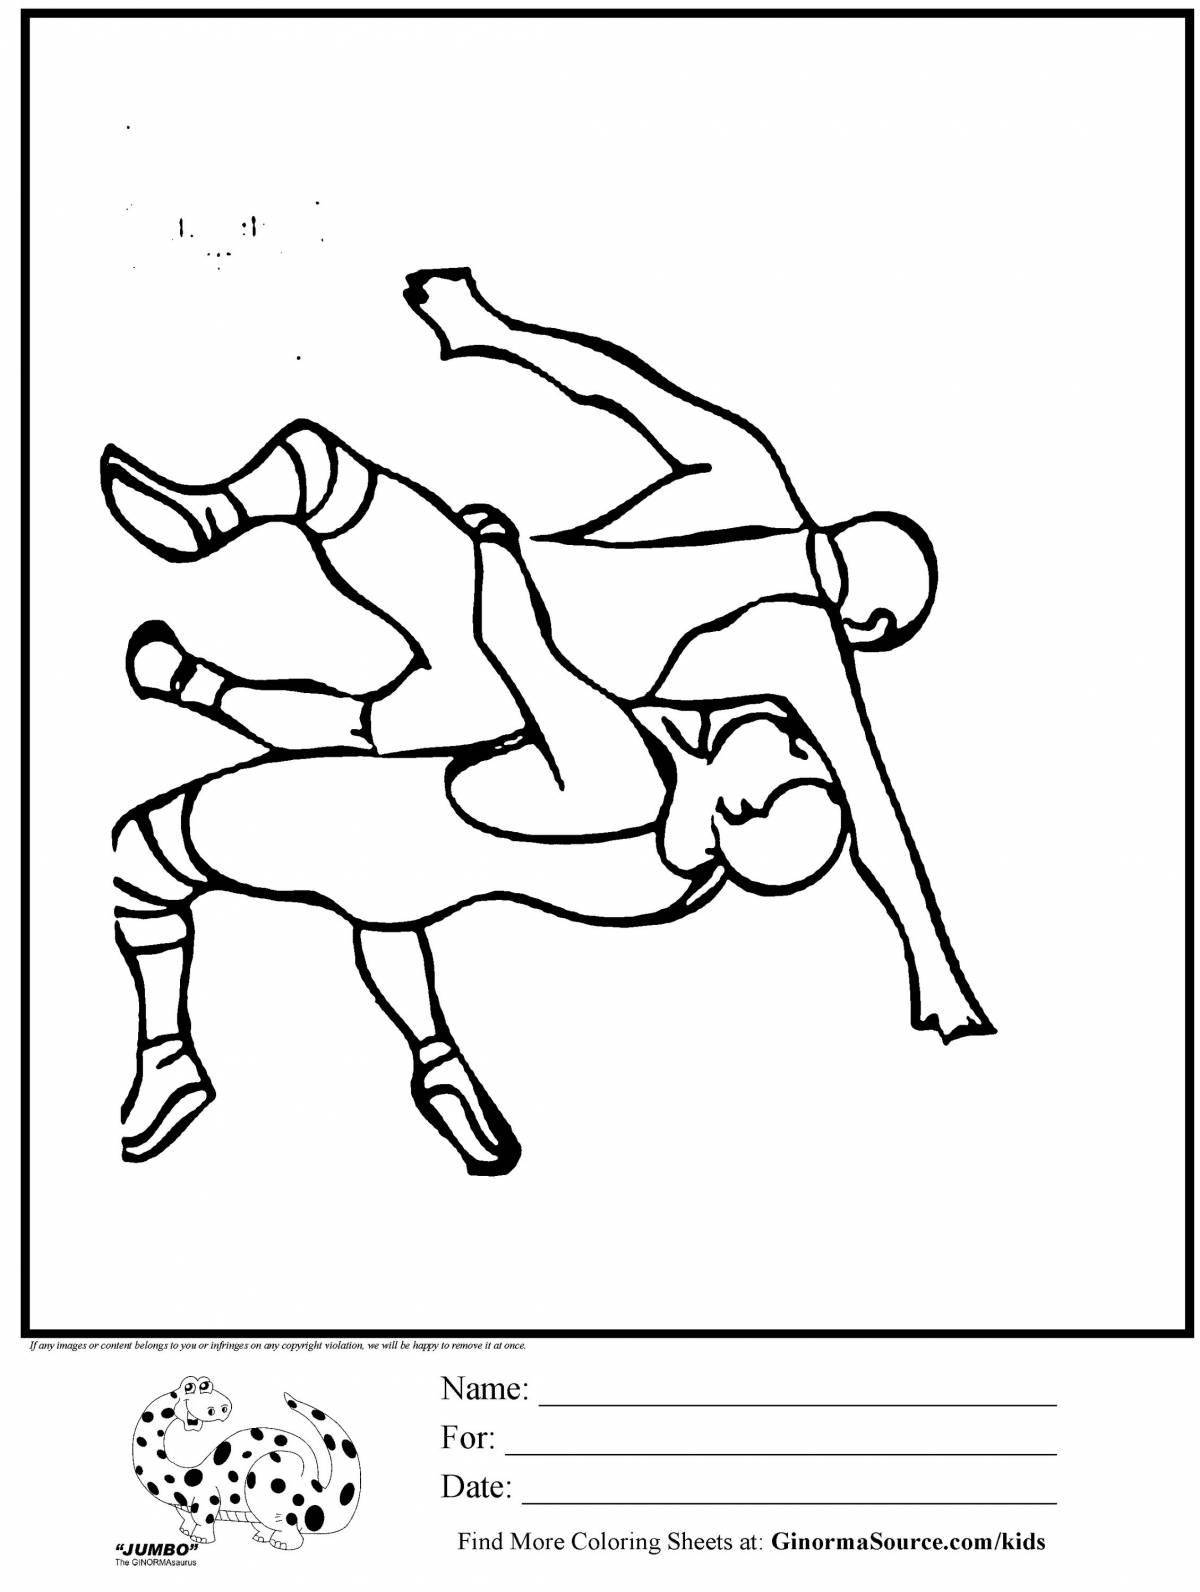 Bright freestyle wrestling coloring page